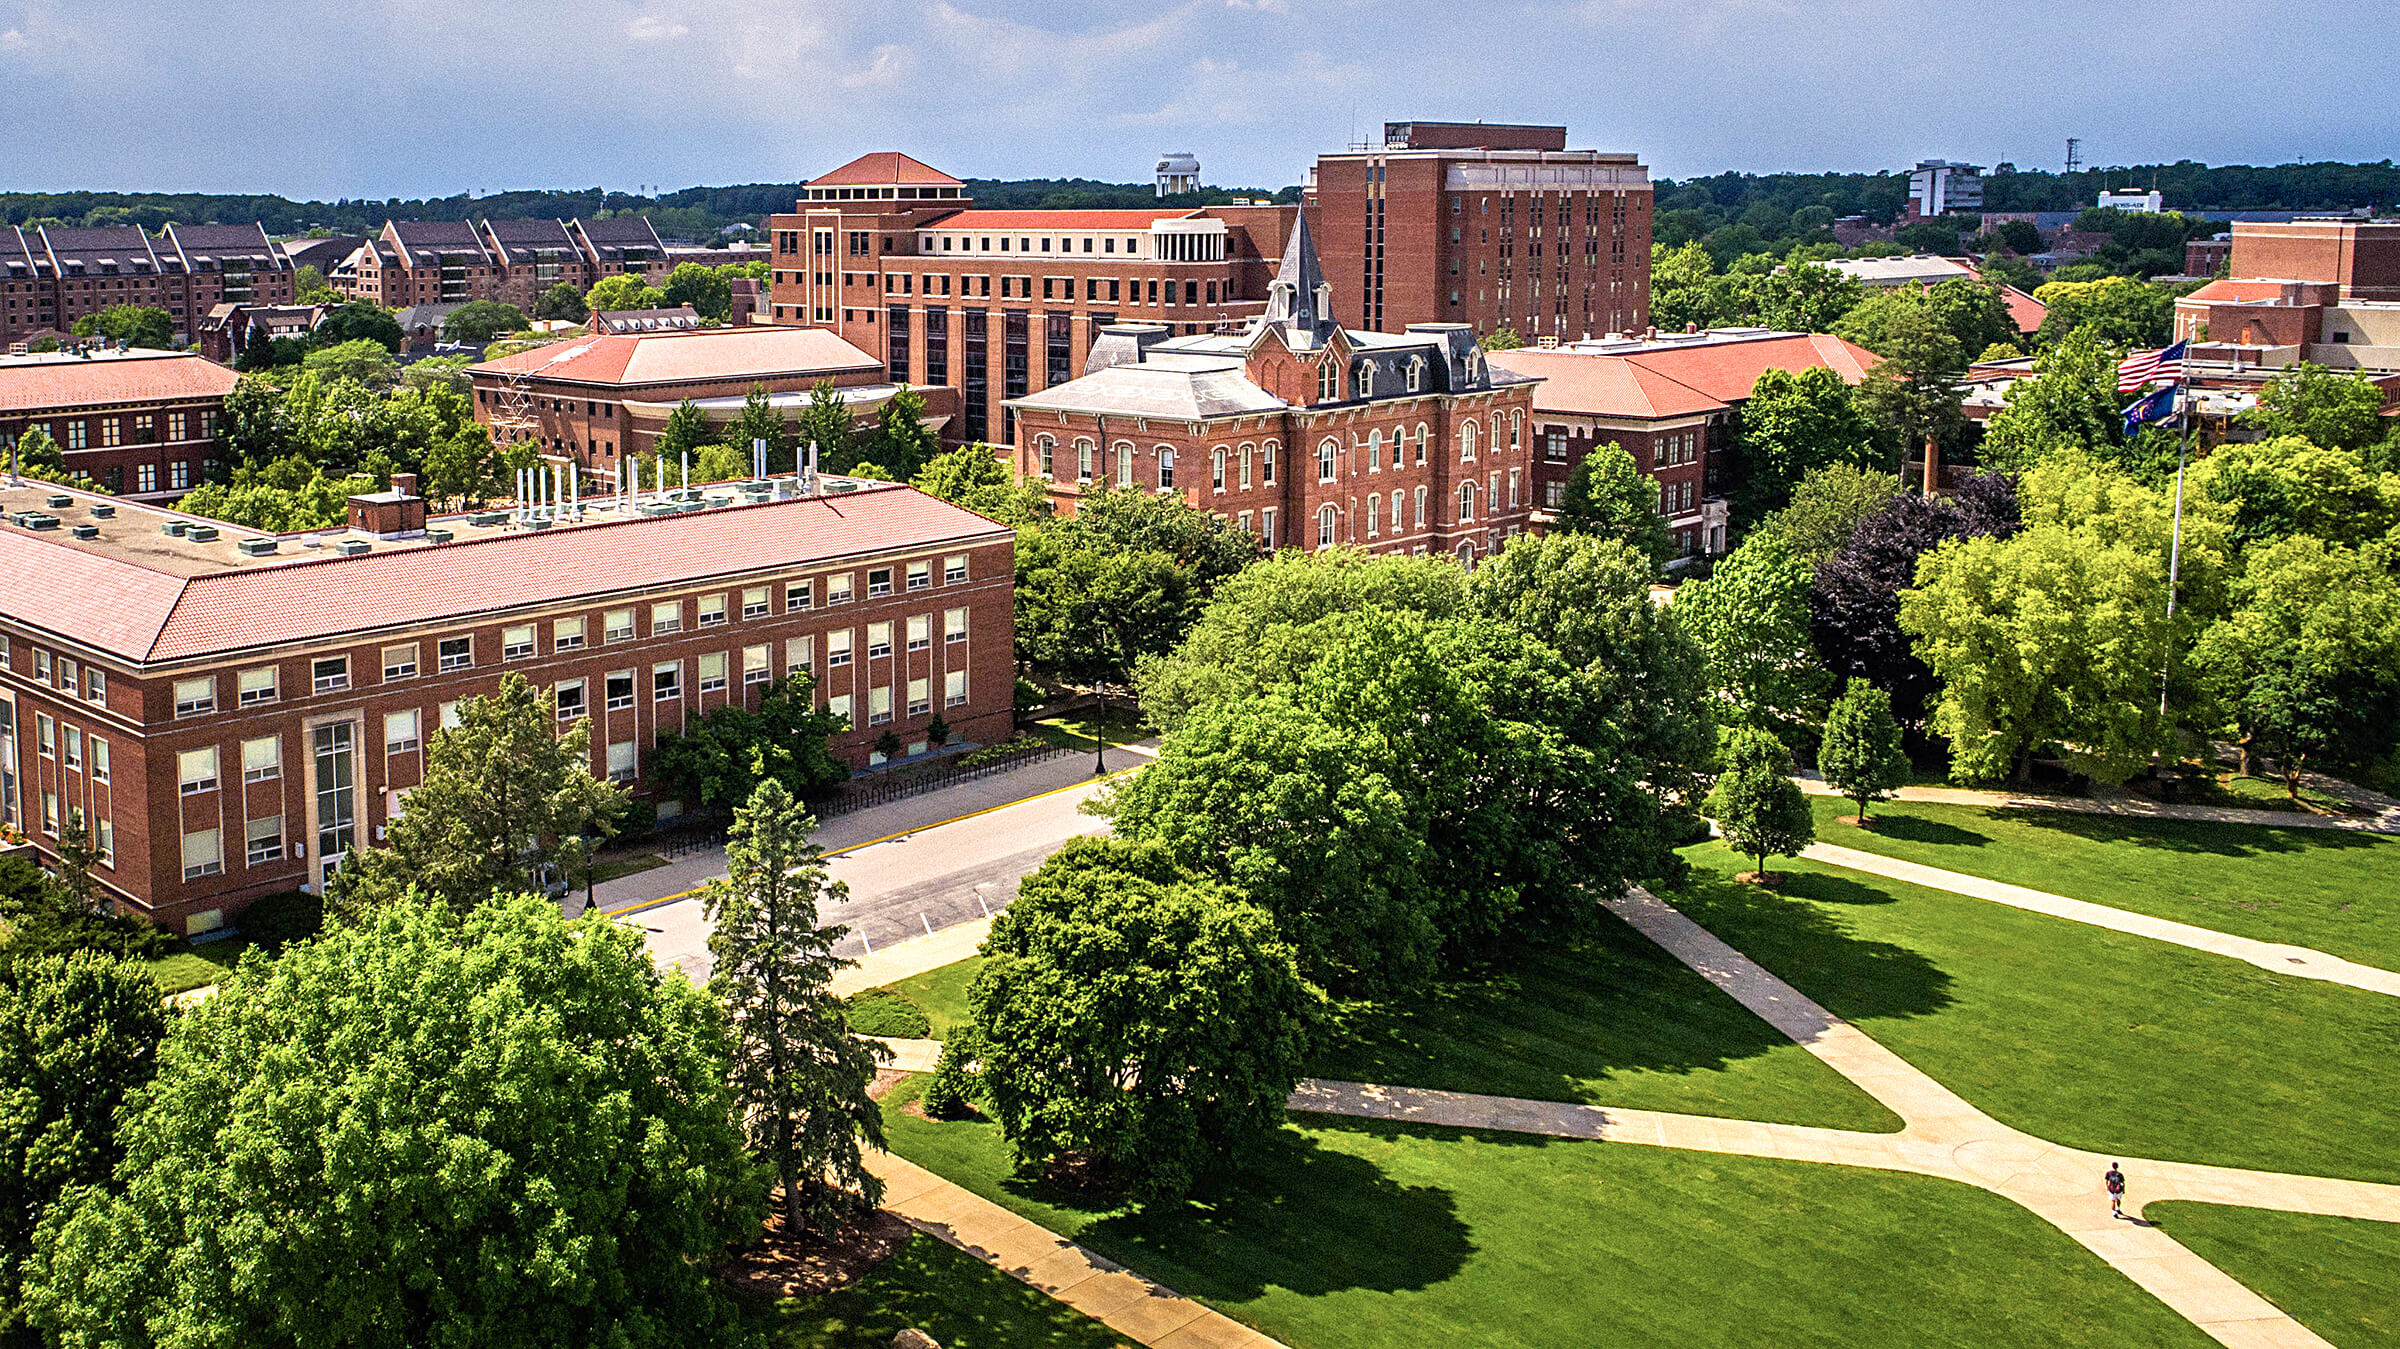 Purdue University buildings and school grounds with neatly cut grass